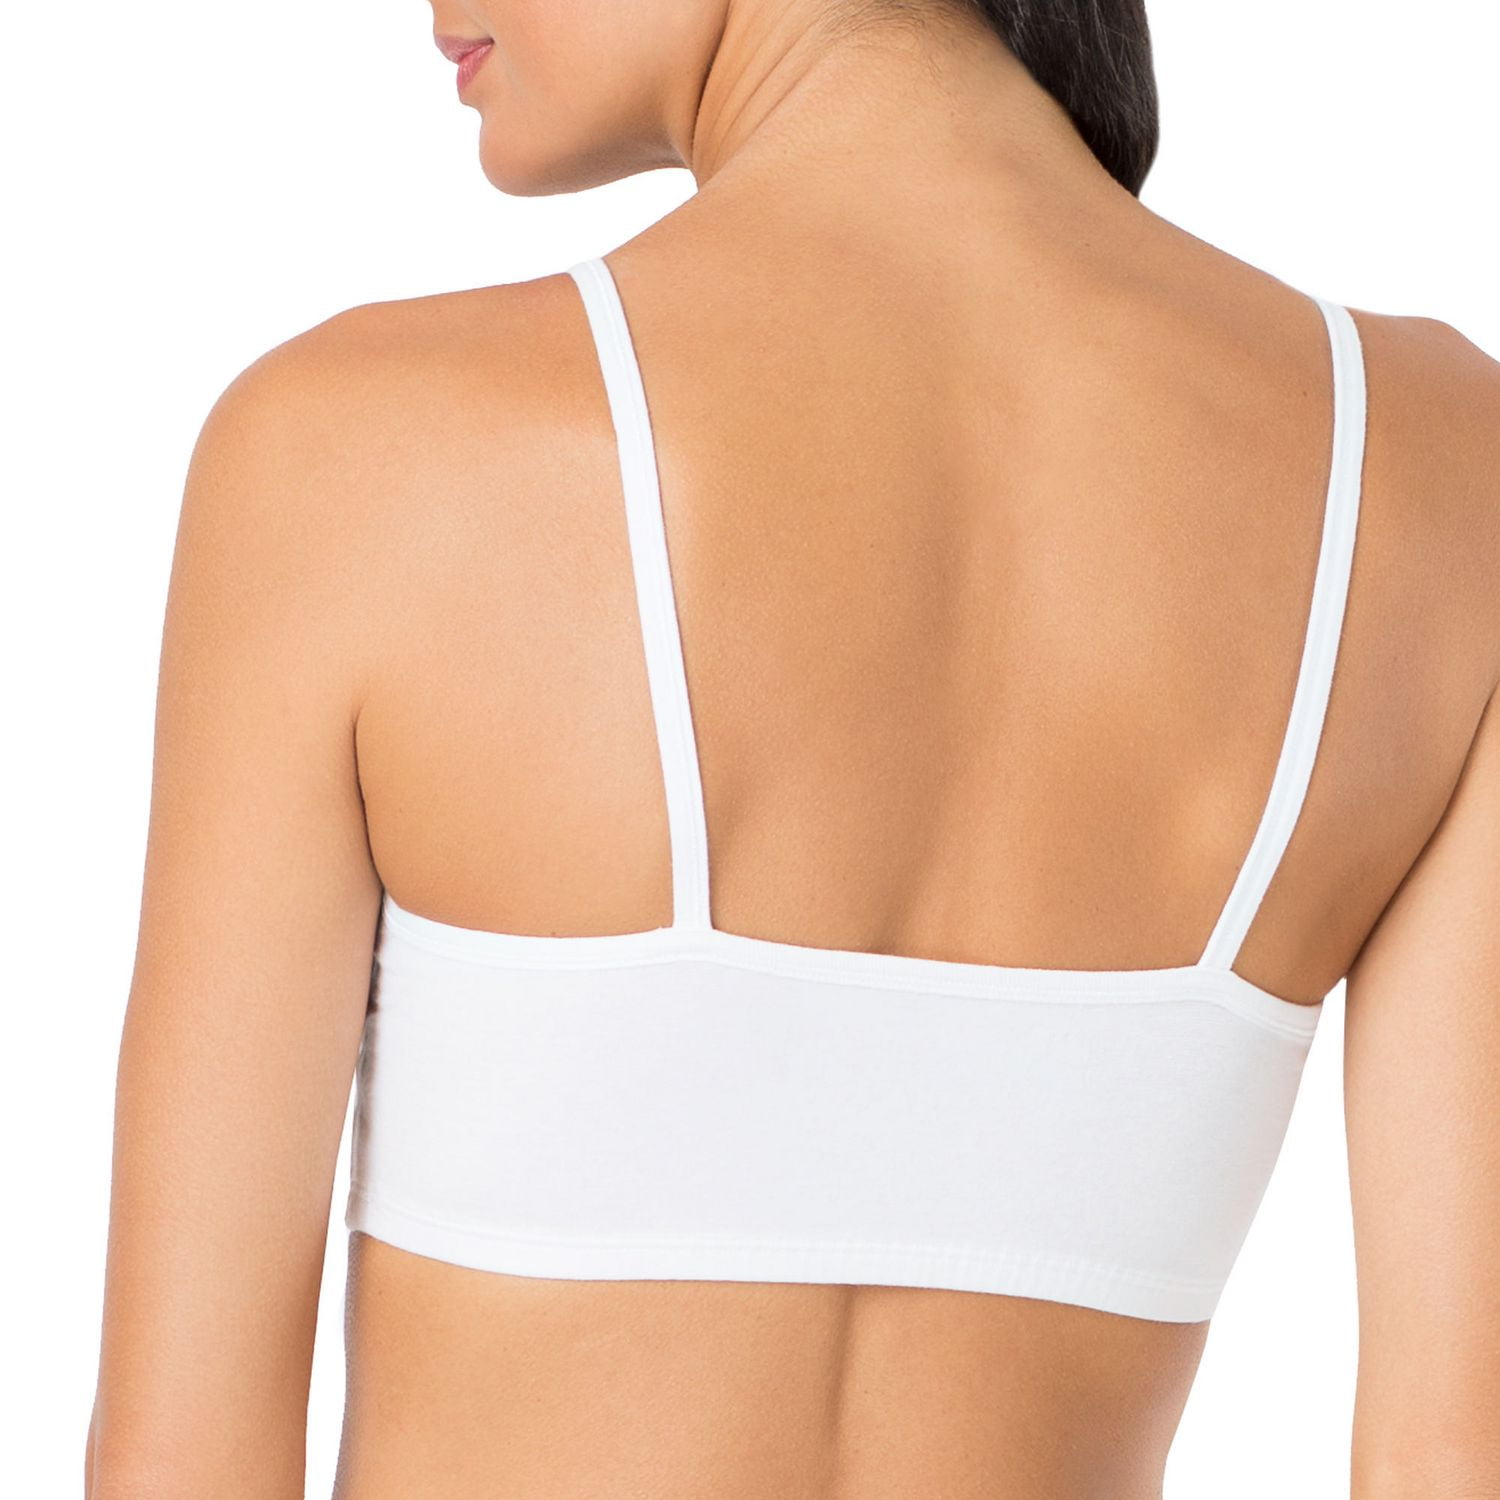 Women's Strappy Sports Bra, 3 Pack, Fruit of the Loom